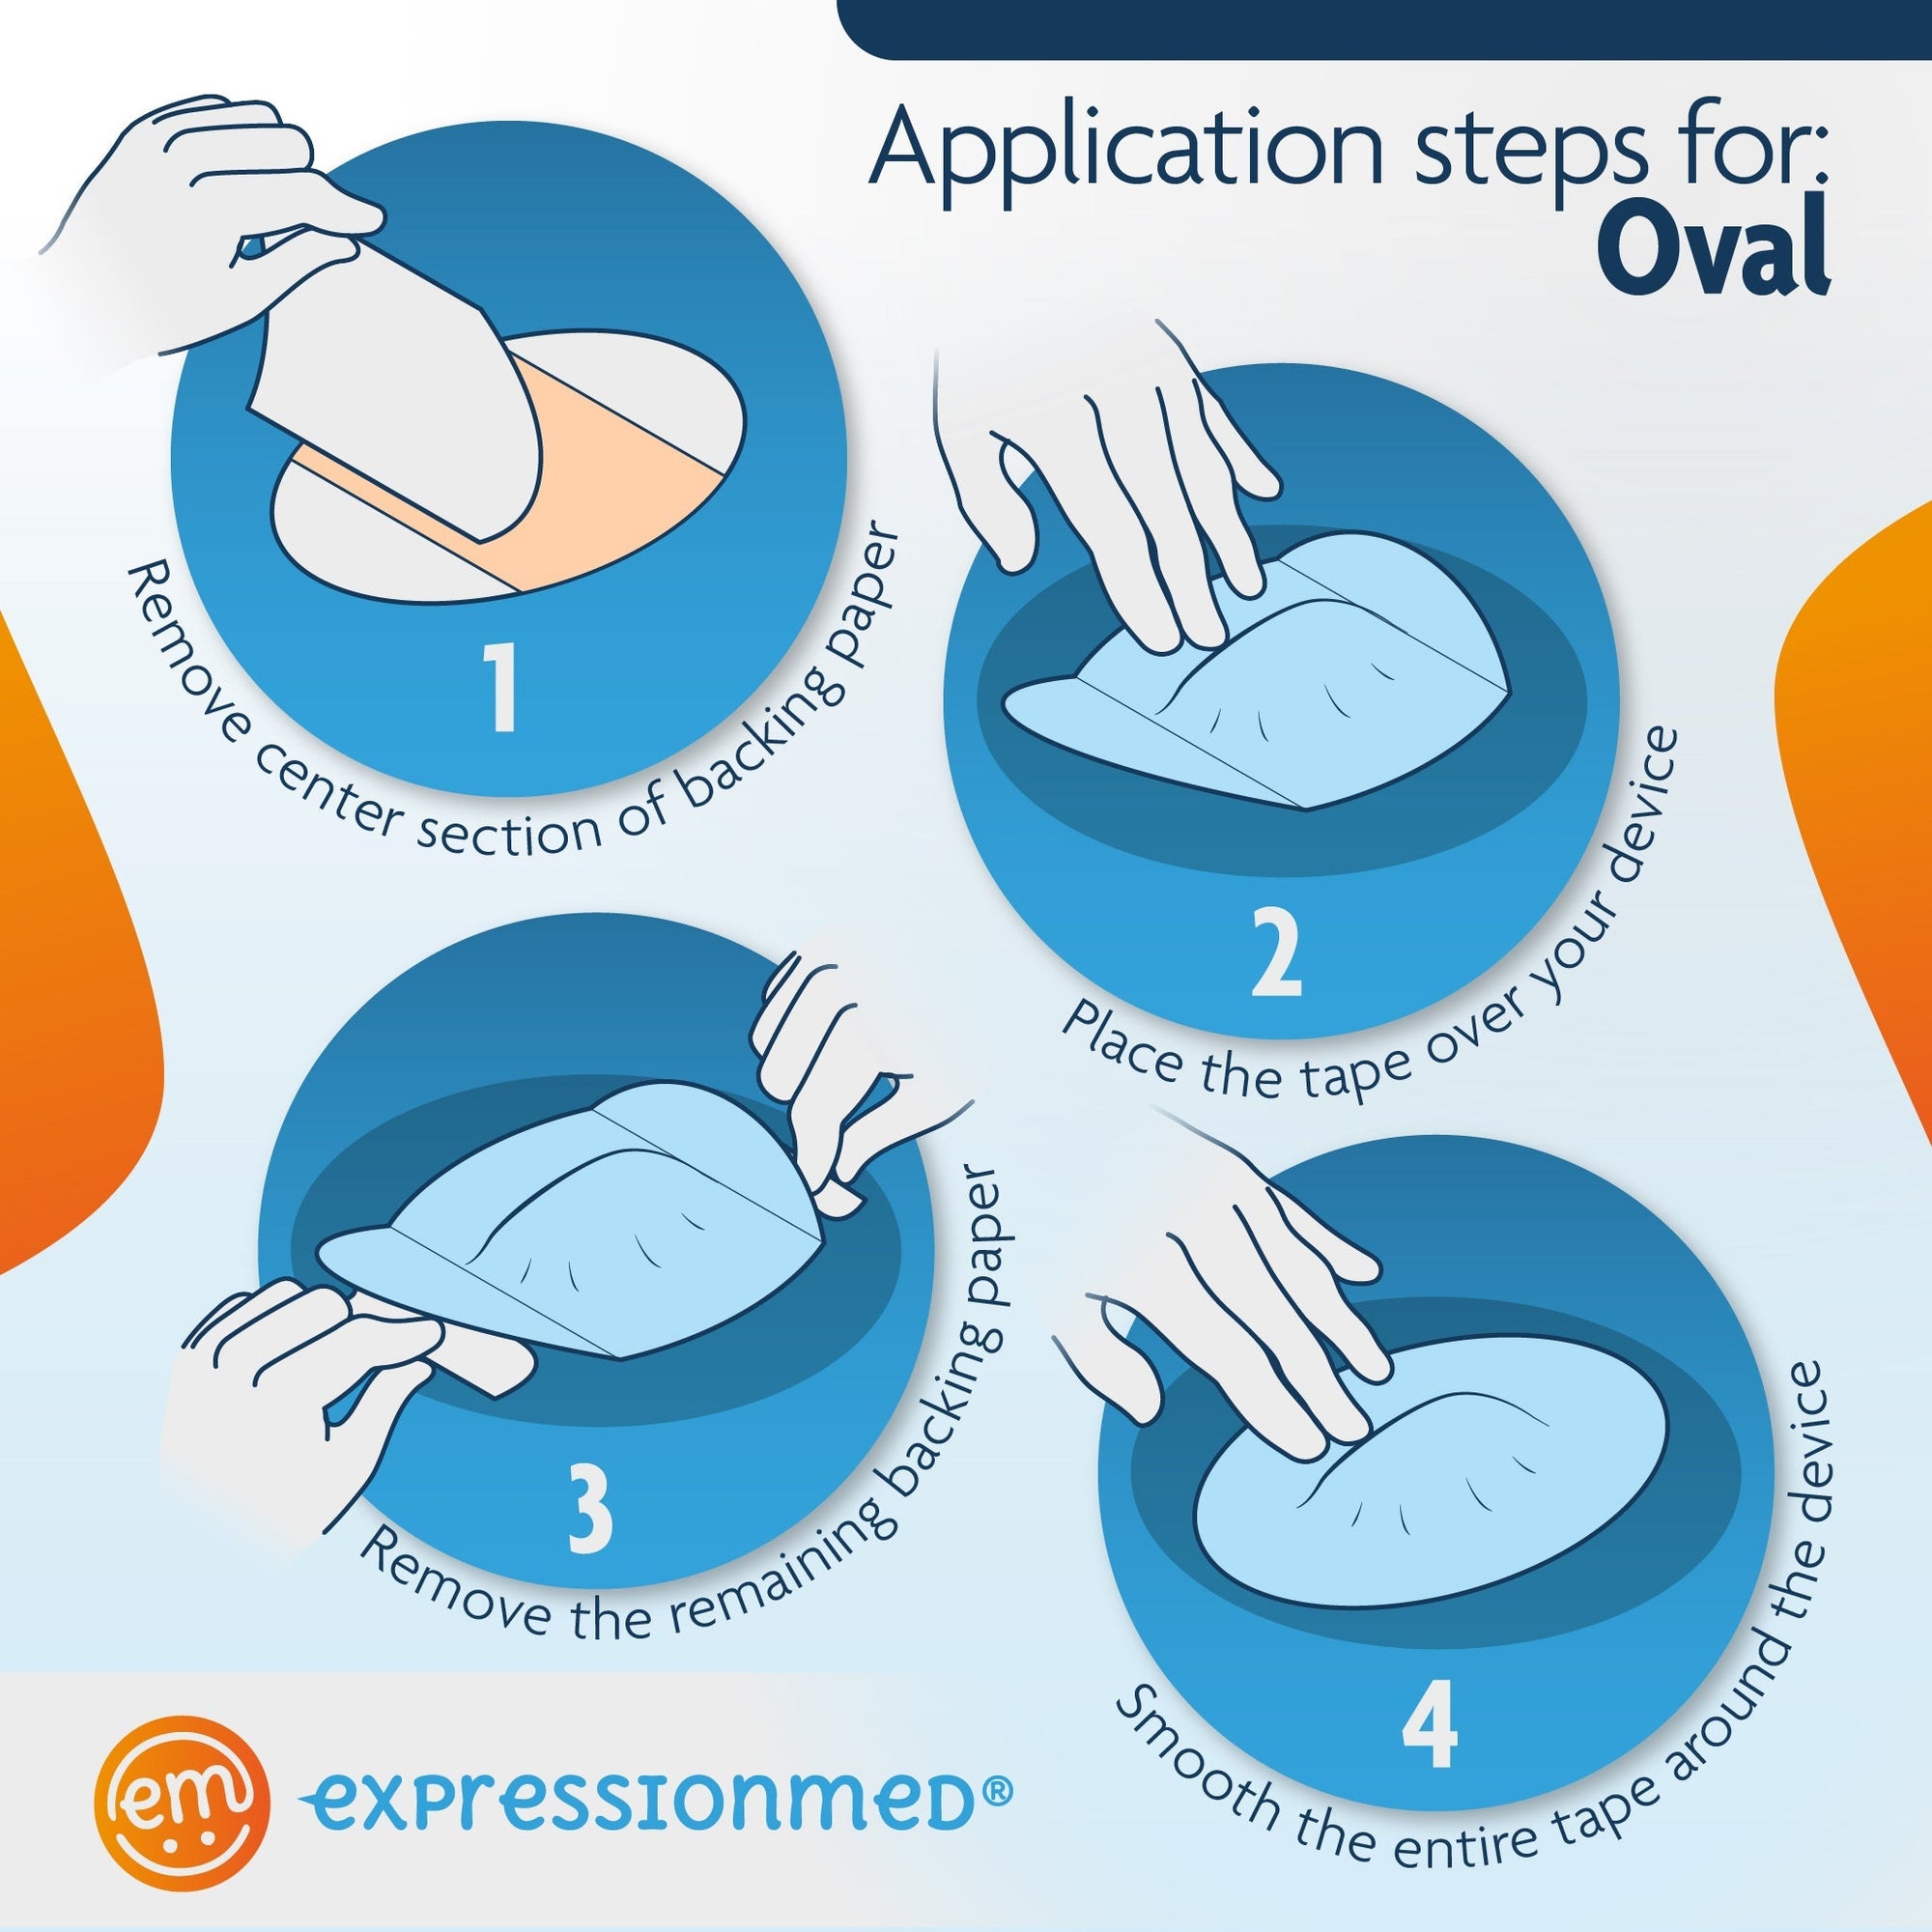 Application Instructions Application Instructions. 1. Prep skin with soap and water. 2. Remove Middle Section and lay center hole over device. 3. Peel off both end sections and smooth down on skin. To remove, hold an edge and strech material off skin.